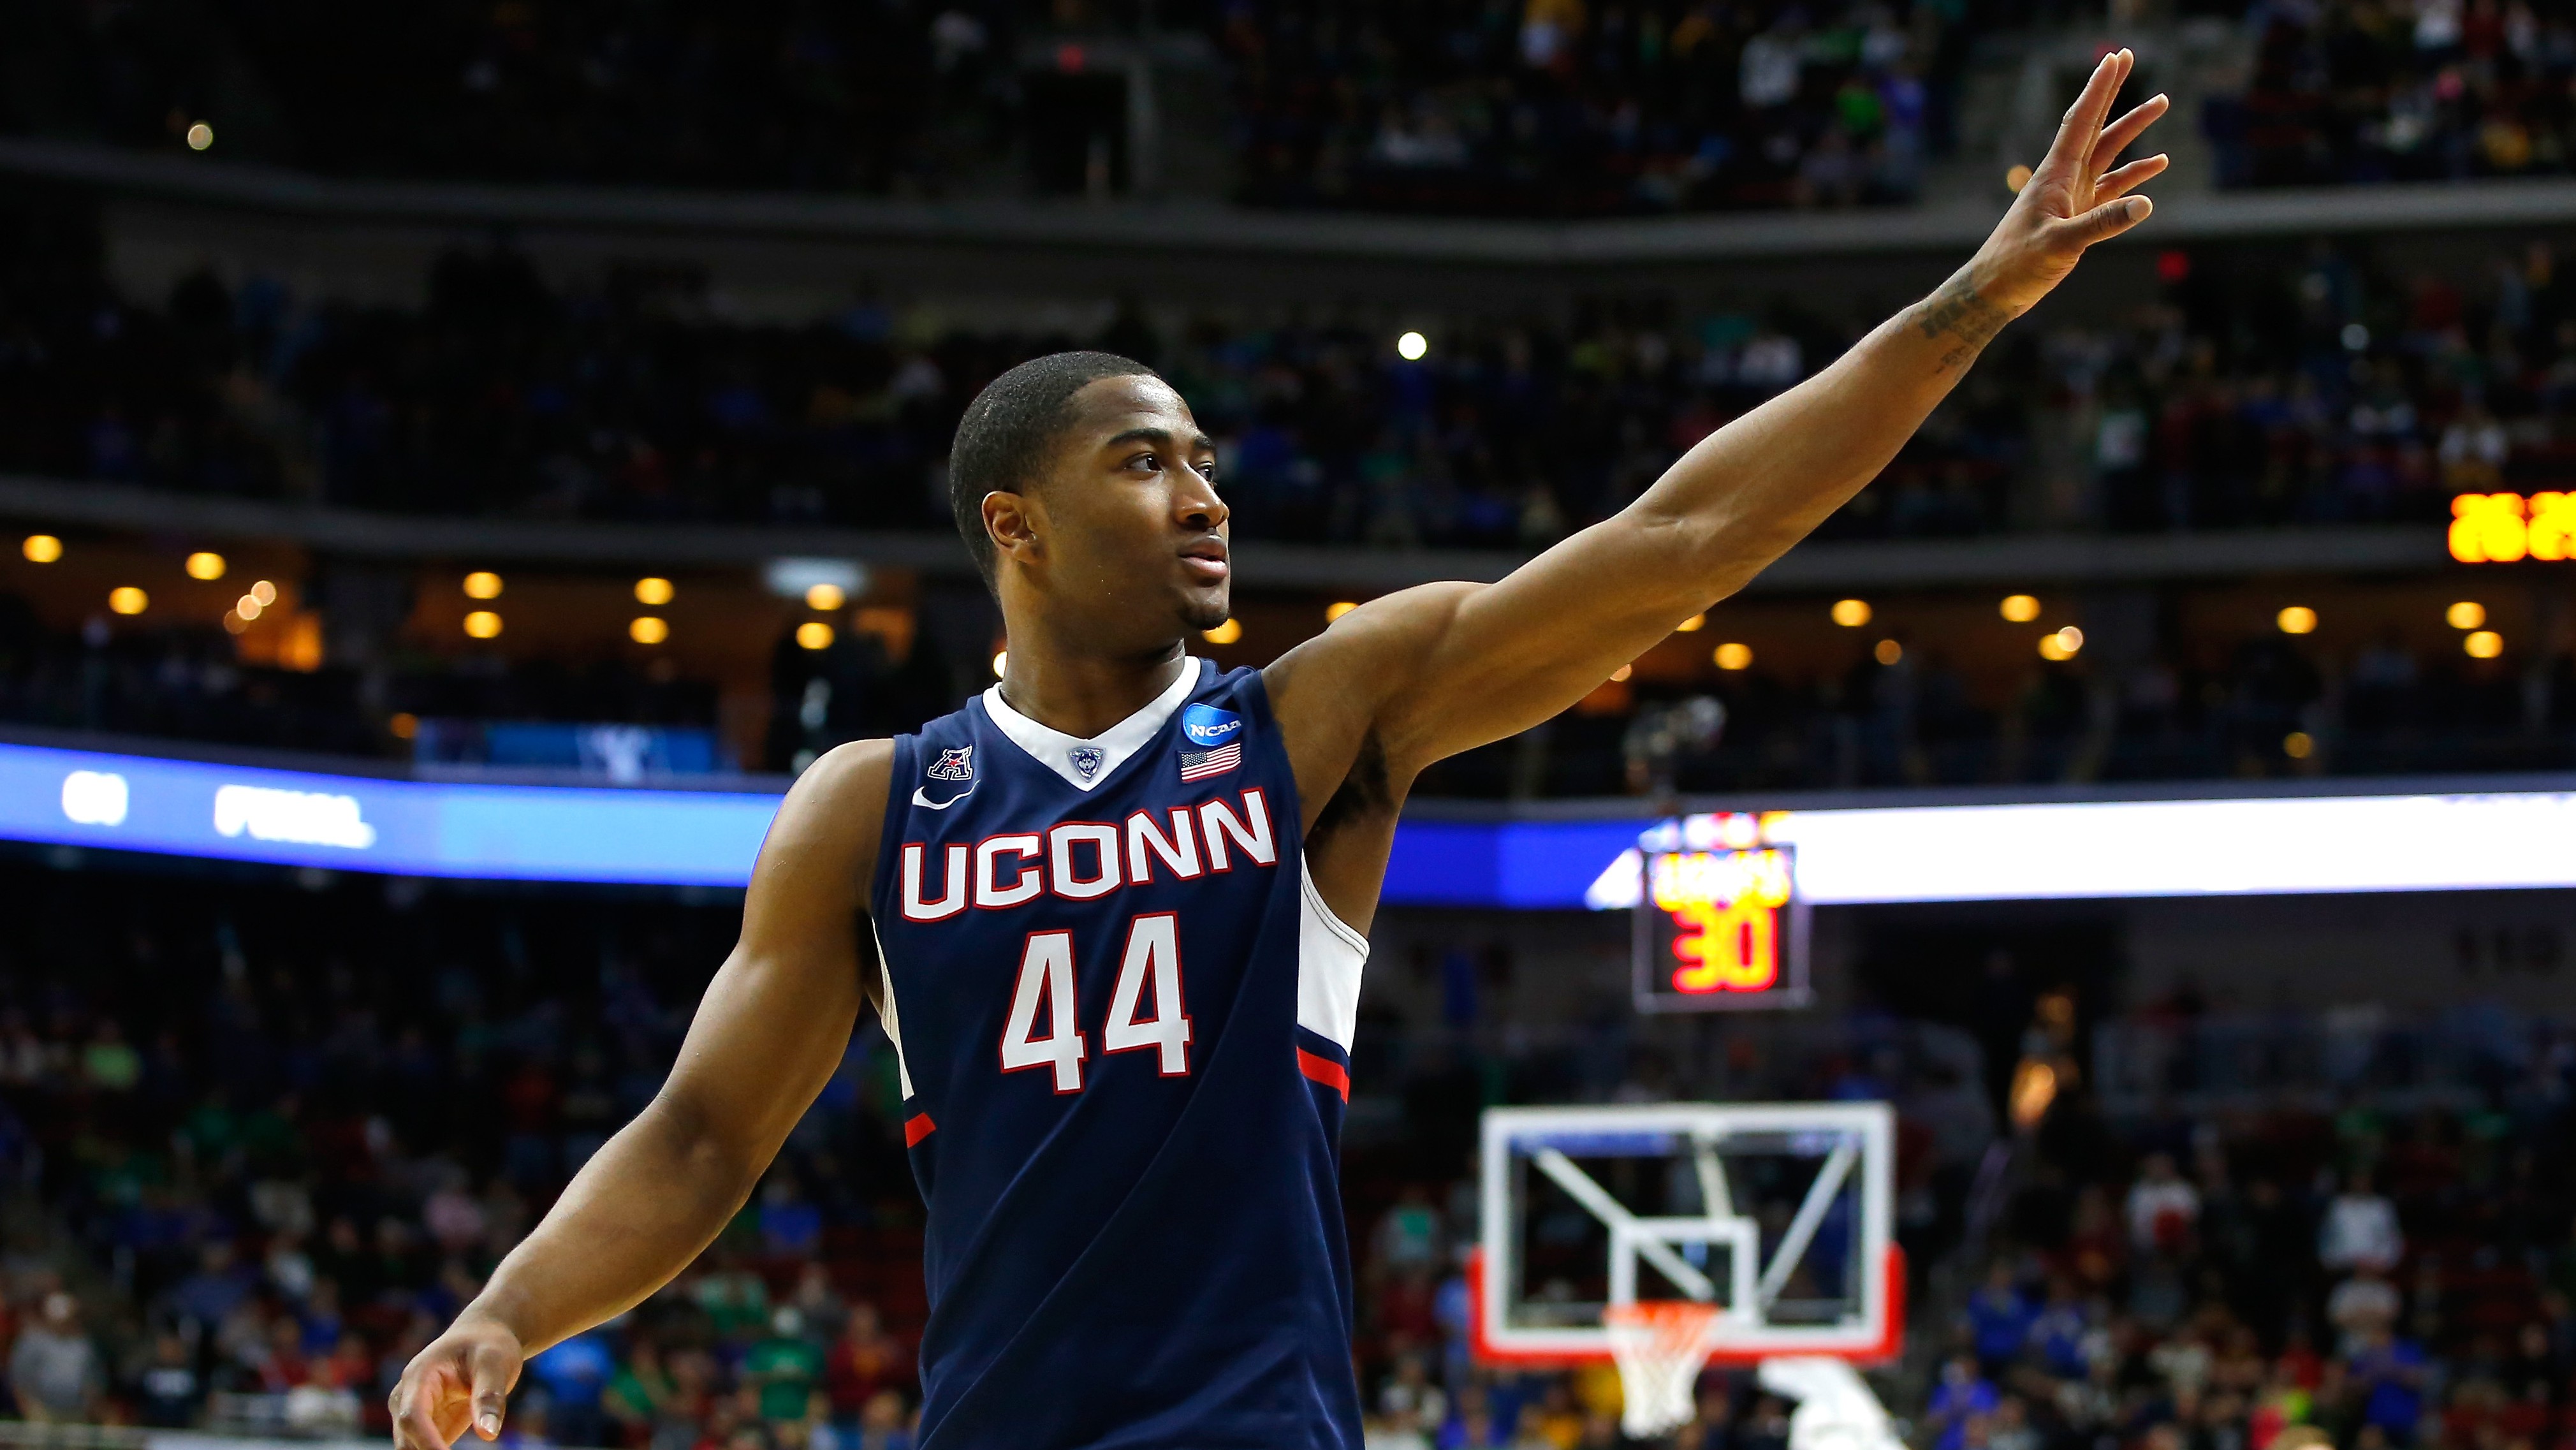 Kansas vs. UConn Live Stream How to Watch Online for Free